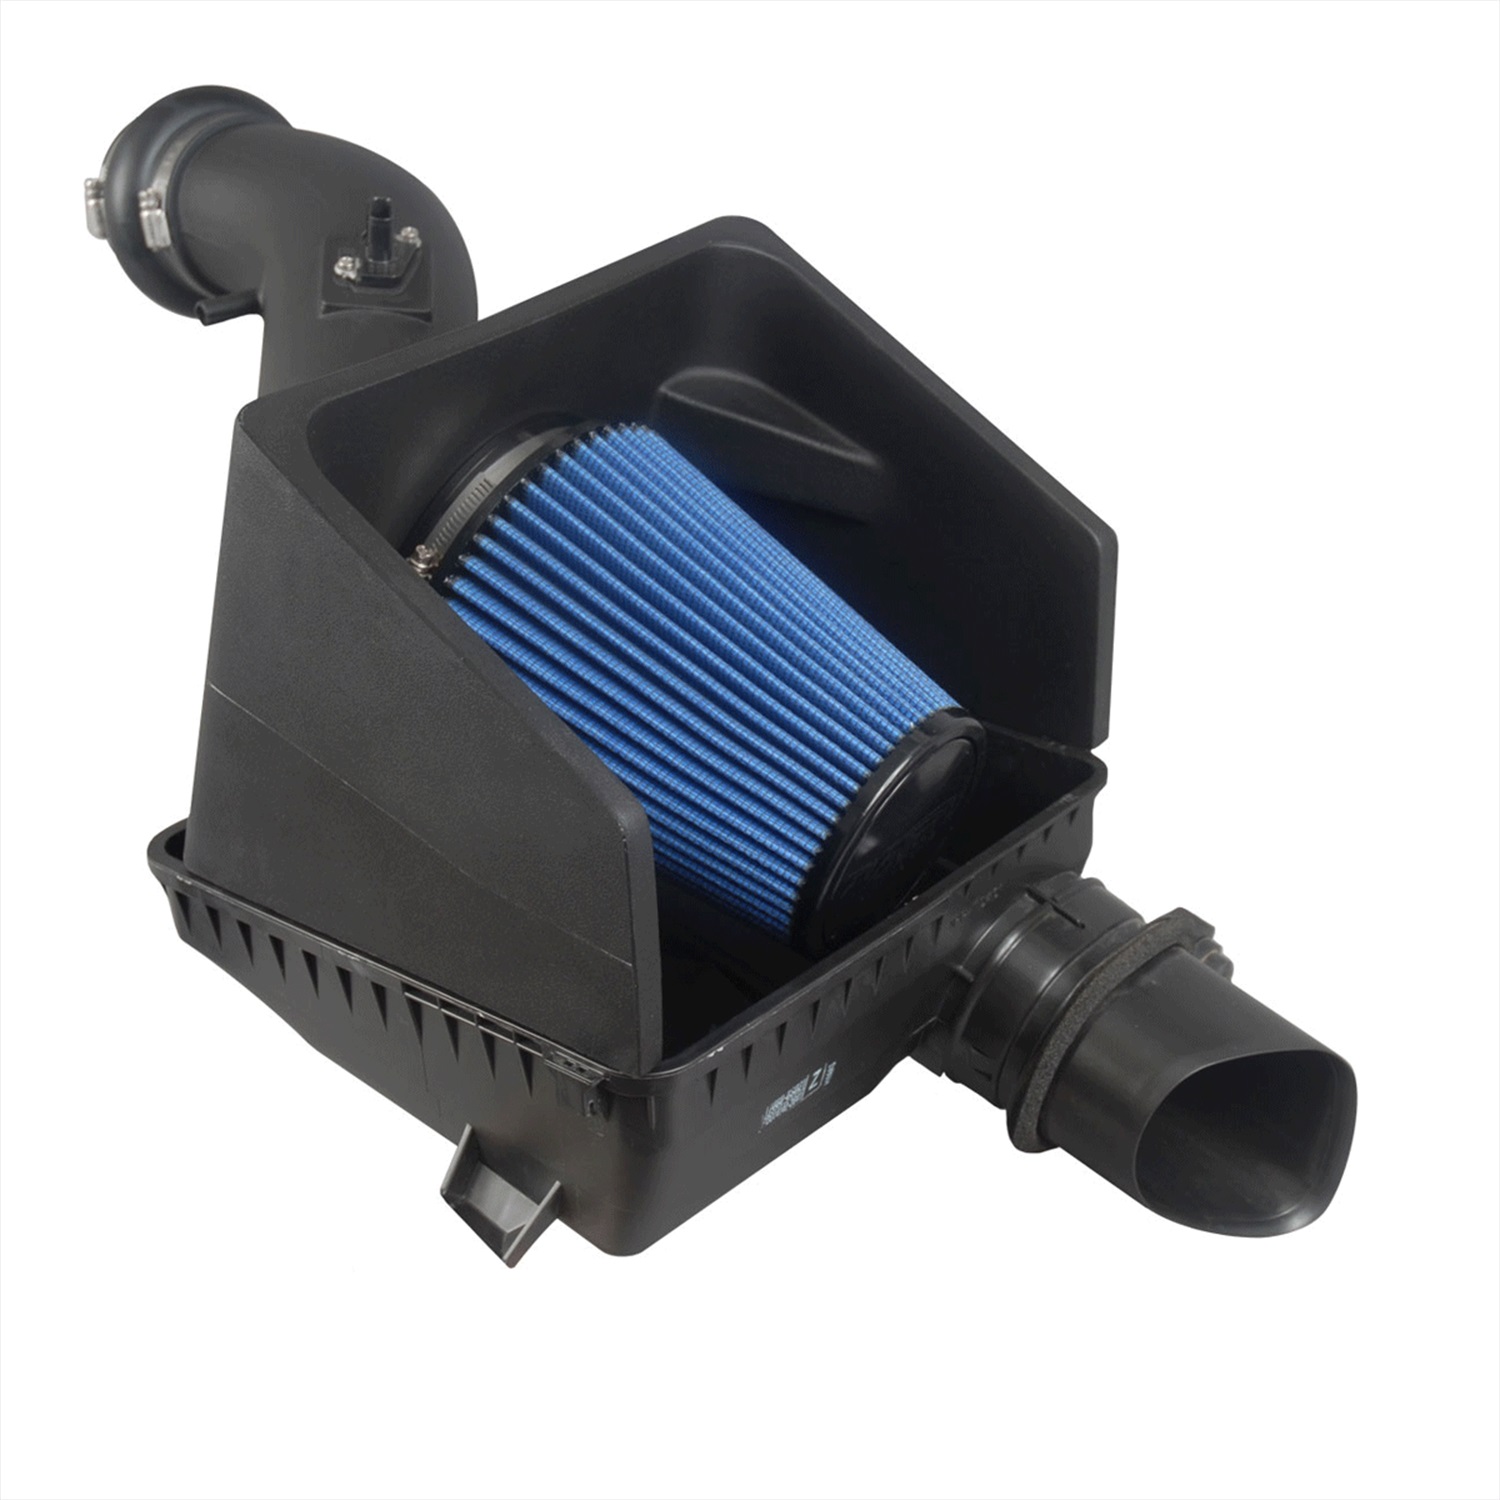 Volant Performance Volant Performance 58857 Fast Fit Intake System Fits 07-13 Sequoia Tundra